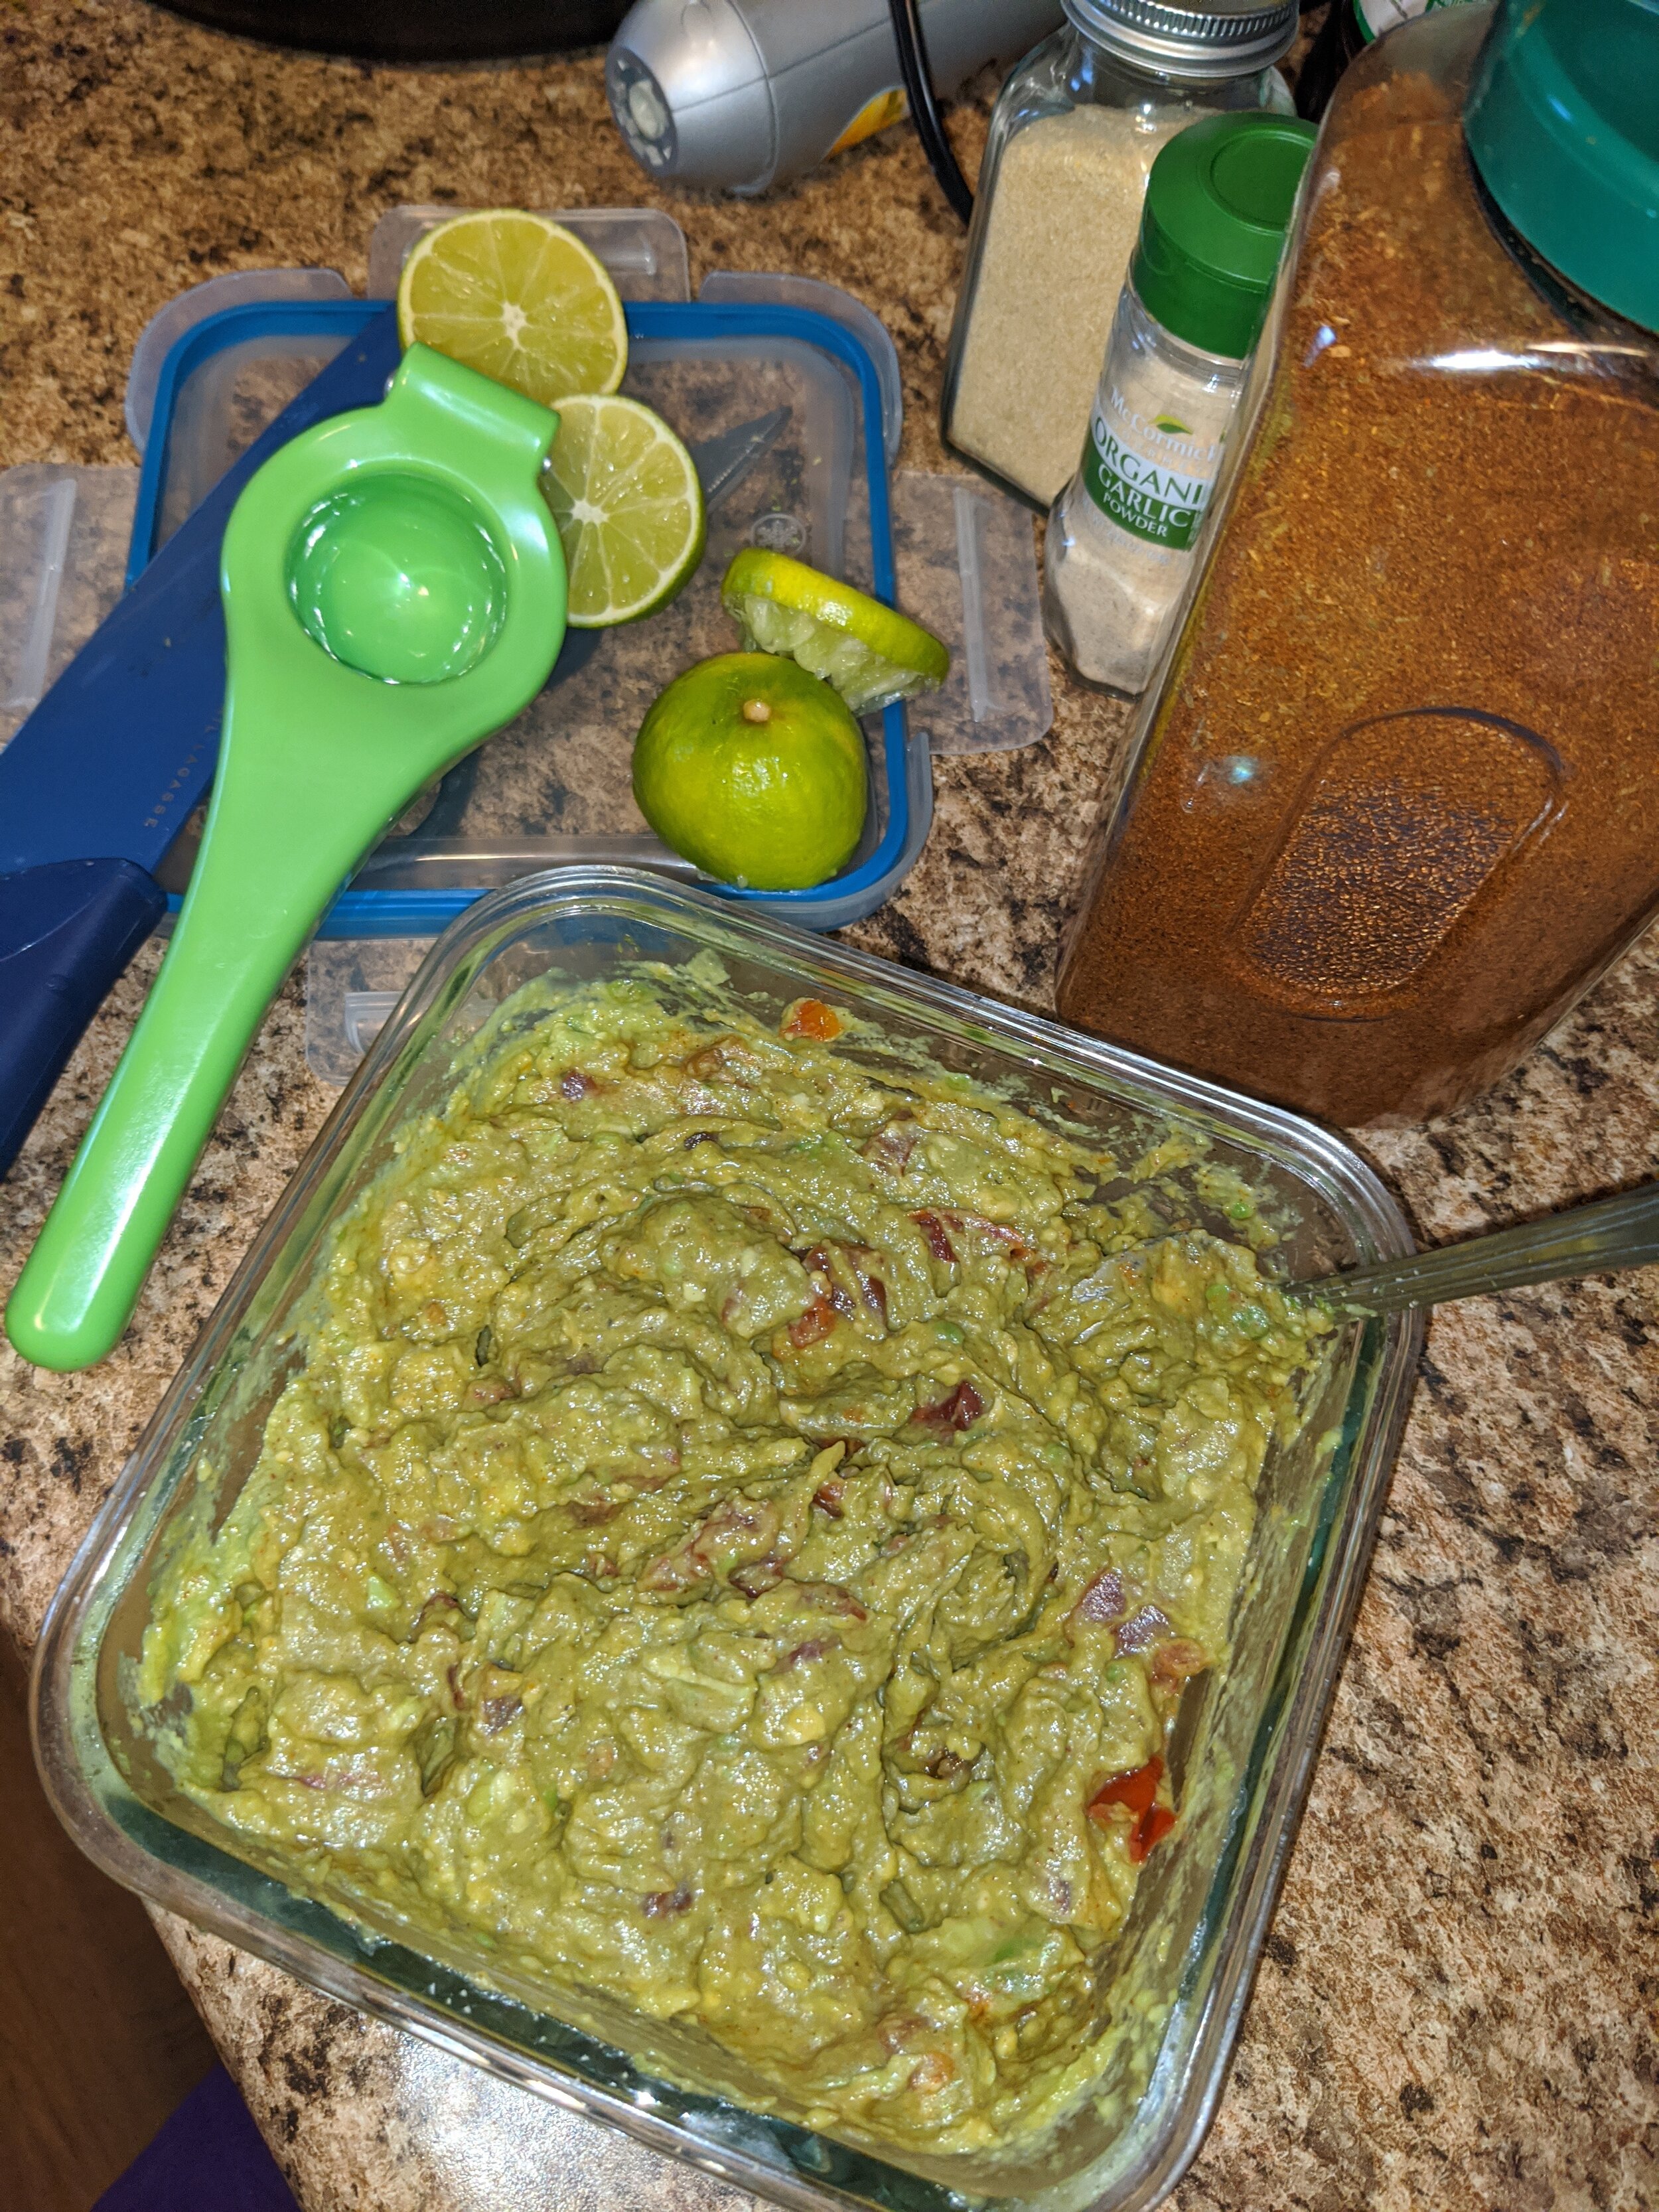 Also made some guacamole with those avocados